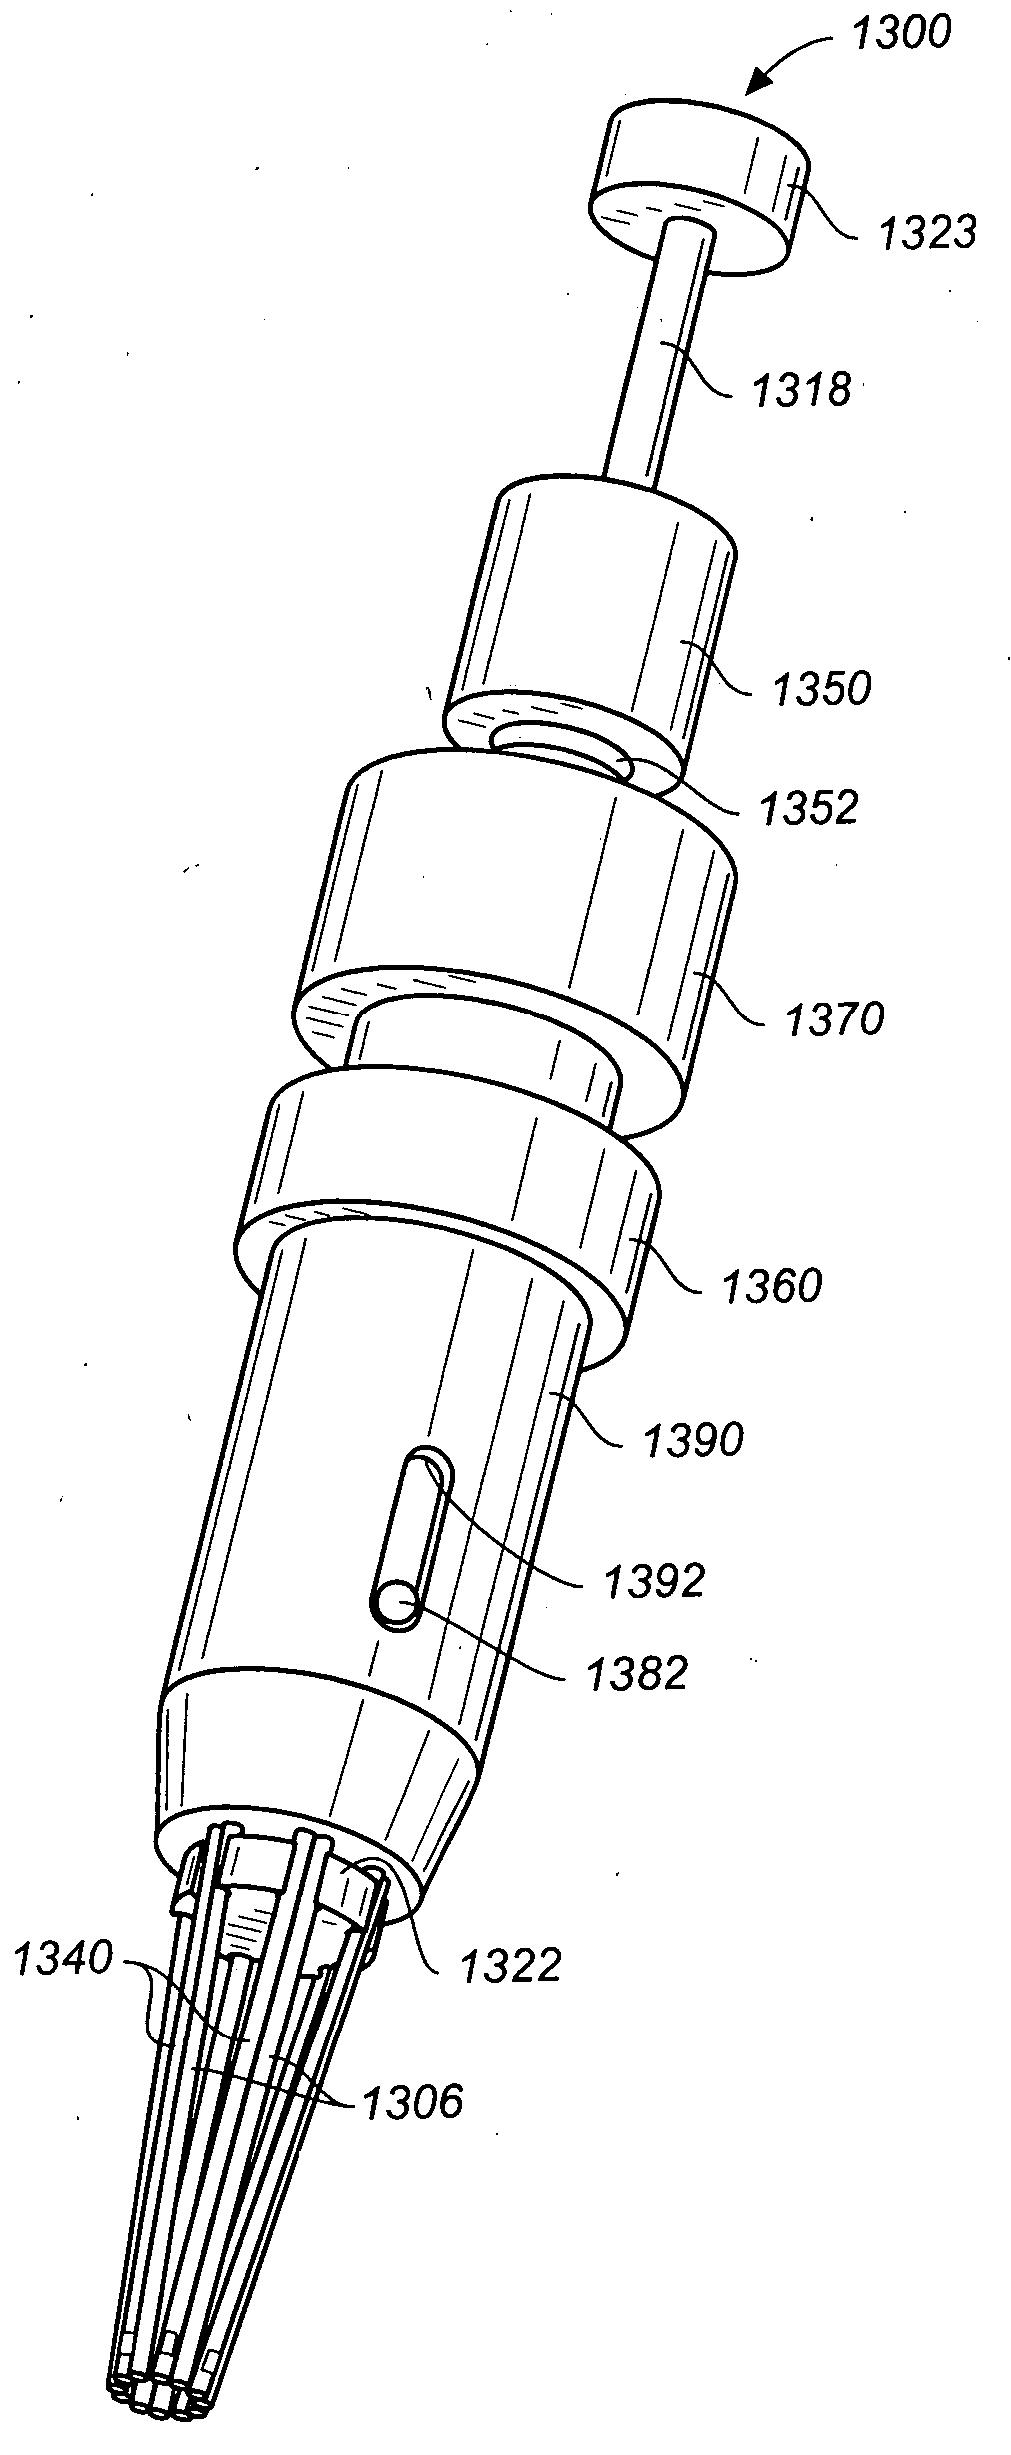 Surgical connection apparatus and methods